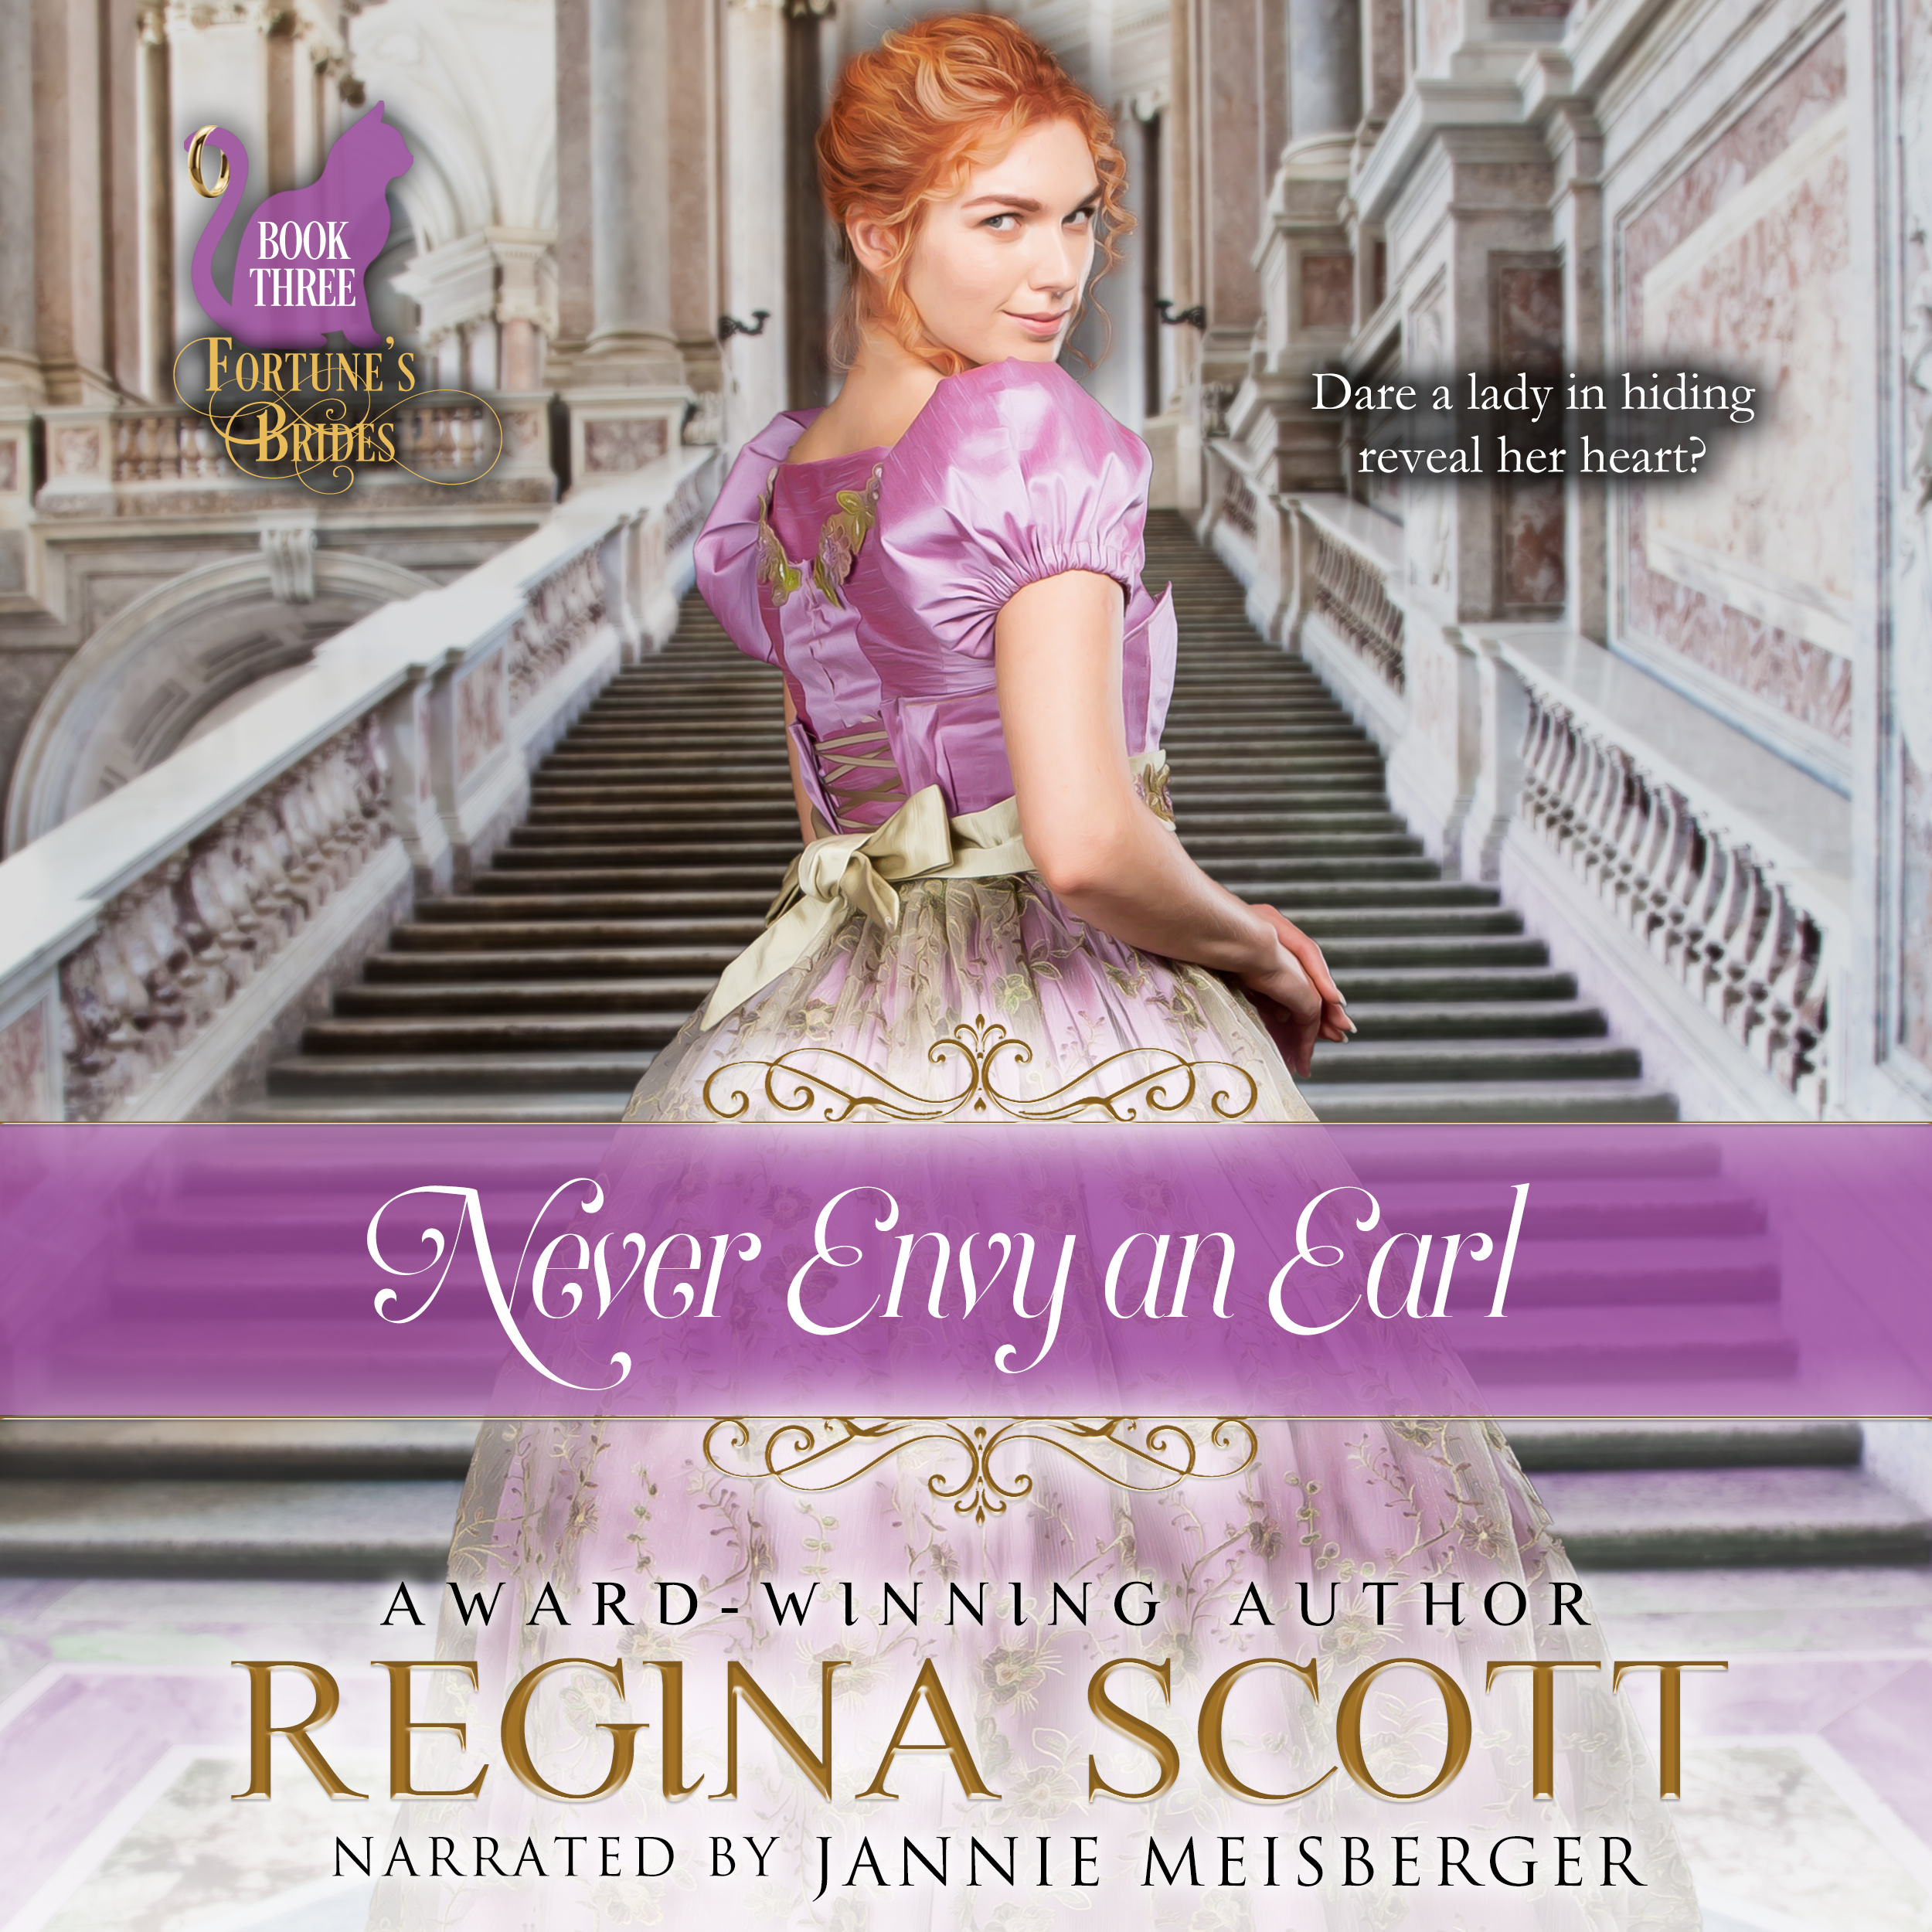 audio book for Never Envy an Earl by Regina Scott, book 3 in the Fortune's Brides series